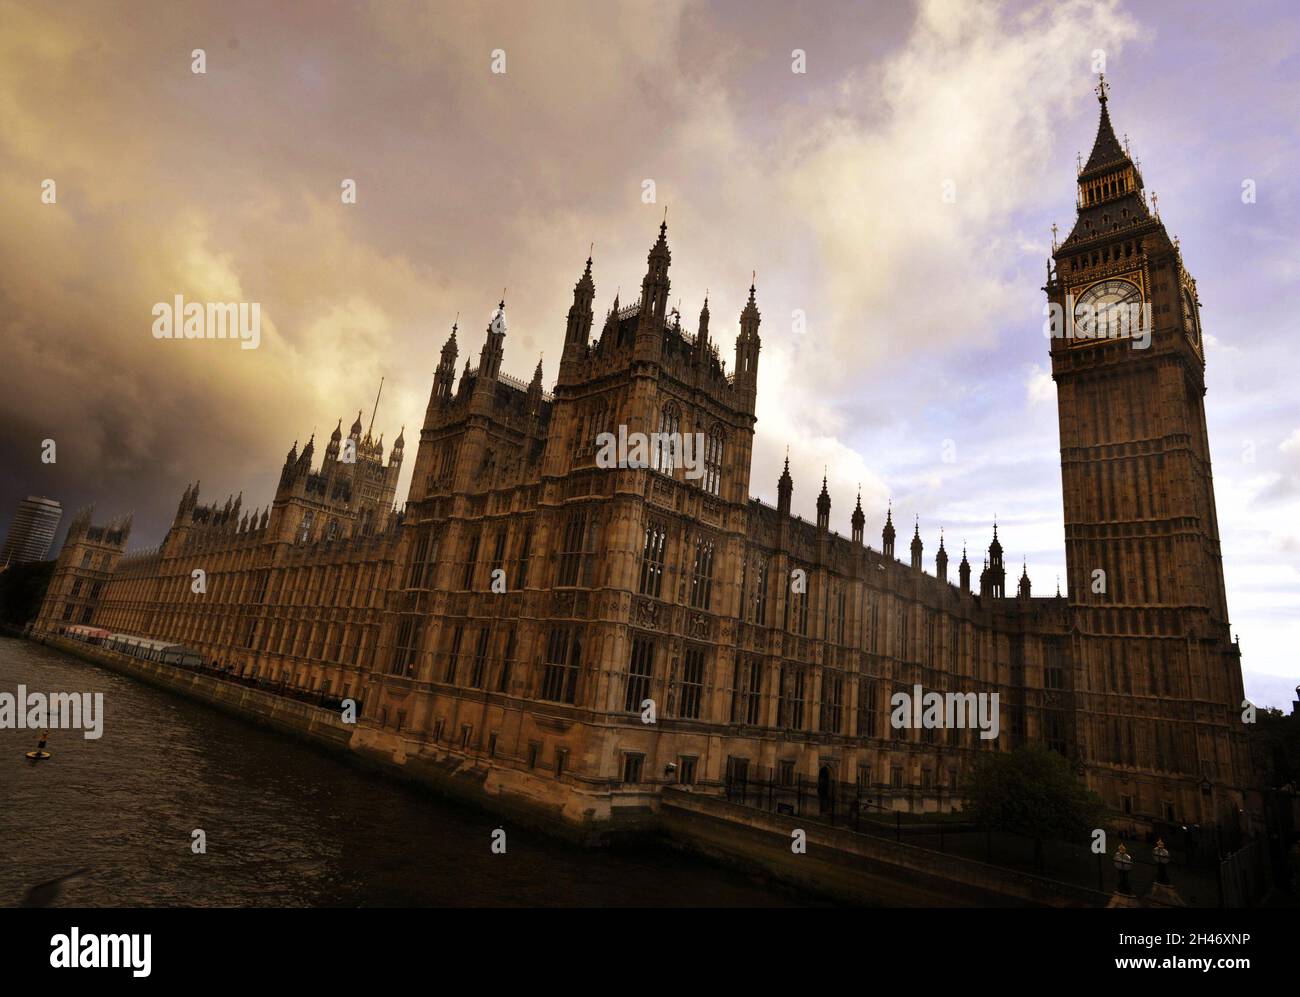 File photo dated 17/5/2000 of the Houses of Parliament in Westminster, central London. Politicians with 'poor ethical standards' should face tougher sanctions, including apologies, fines, and resignations, a review by the anti-corruption watchdog has claimed while calling for a radical overhaul of the system. The investigation by Lord Evans of Weardale, chair of the Committee on Standards in Public Life, was commissioned after the Greensill scandal, which saw former prime minister David Cameron escaping punishment, despite privately lobbying ministers in efforts to secure access to an emergenc Stock Photo